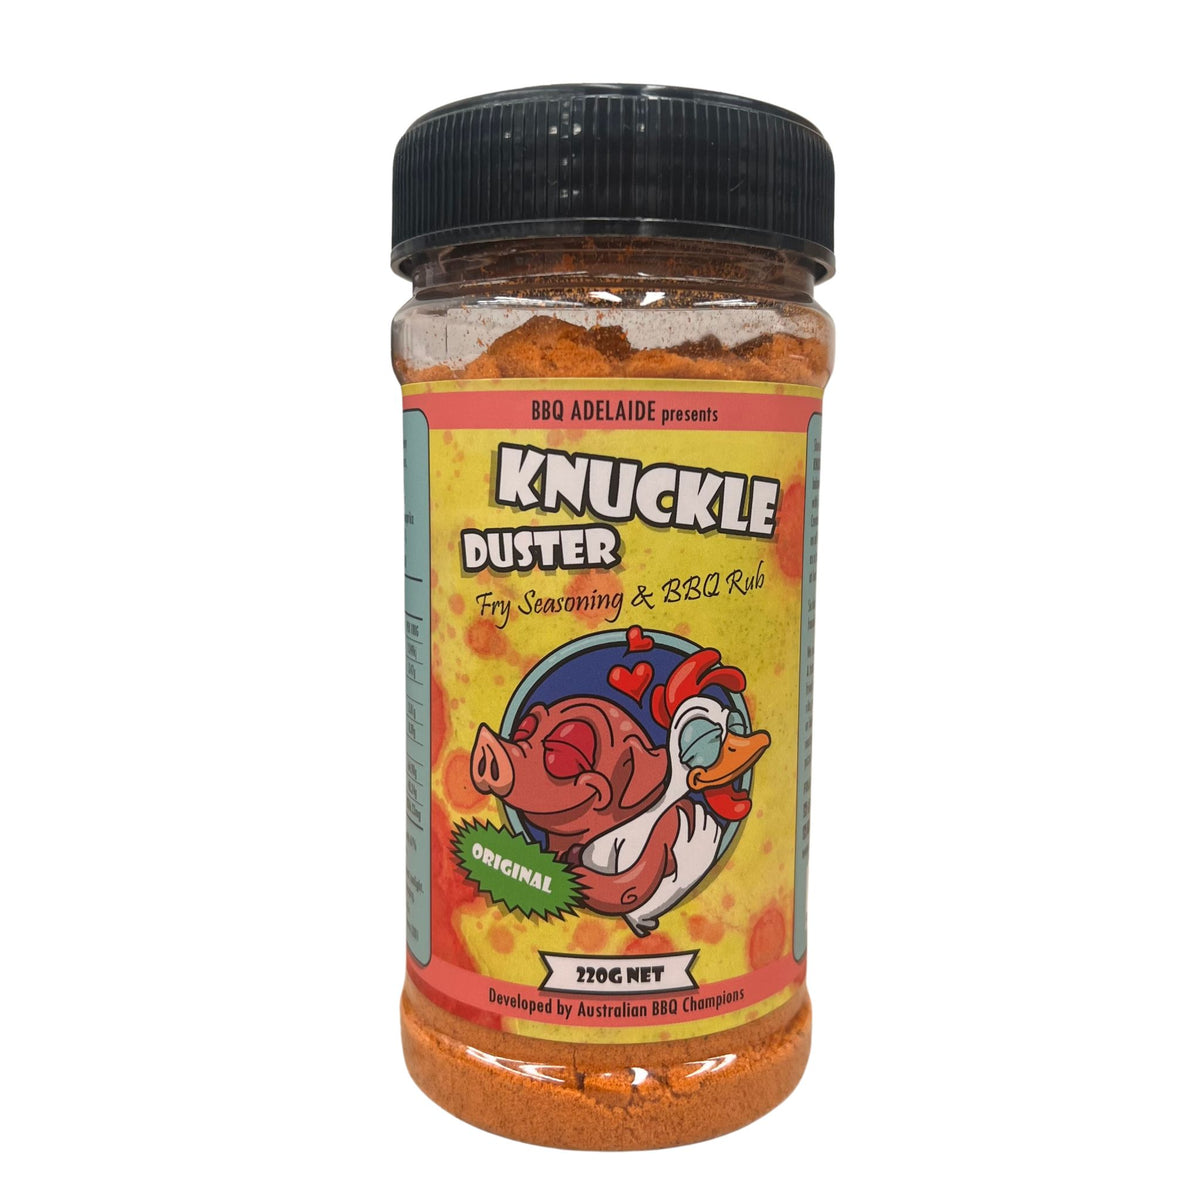 BBQ Adelaide Knuckle Duster Wing Dust, Fry Seasoning &amp; BBQ Rub